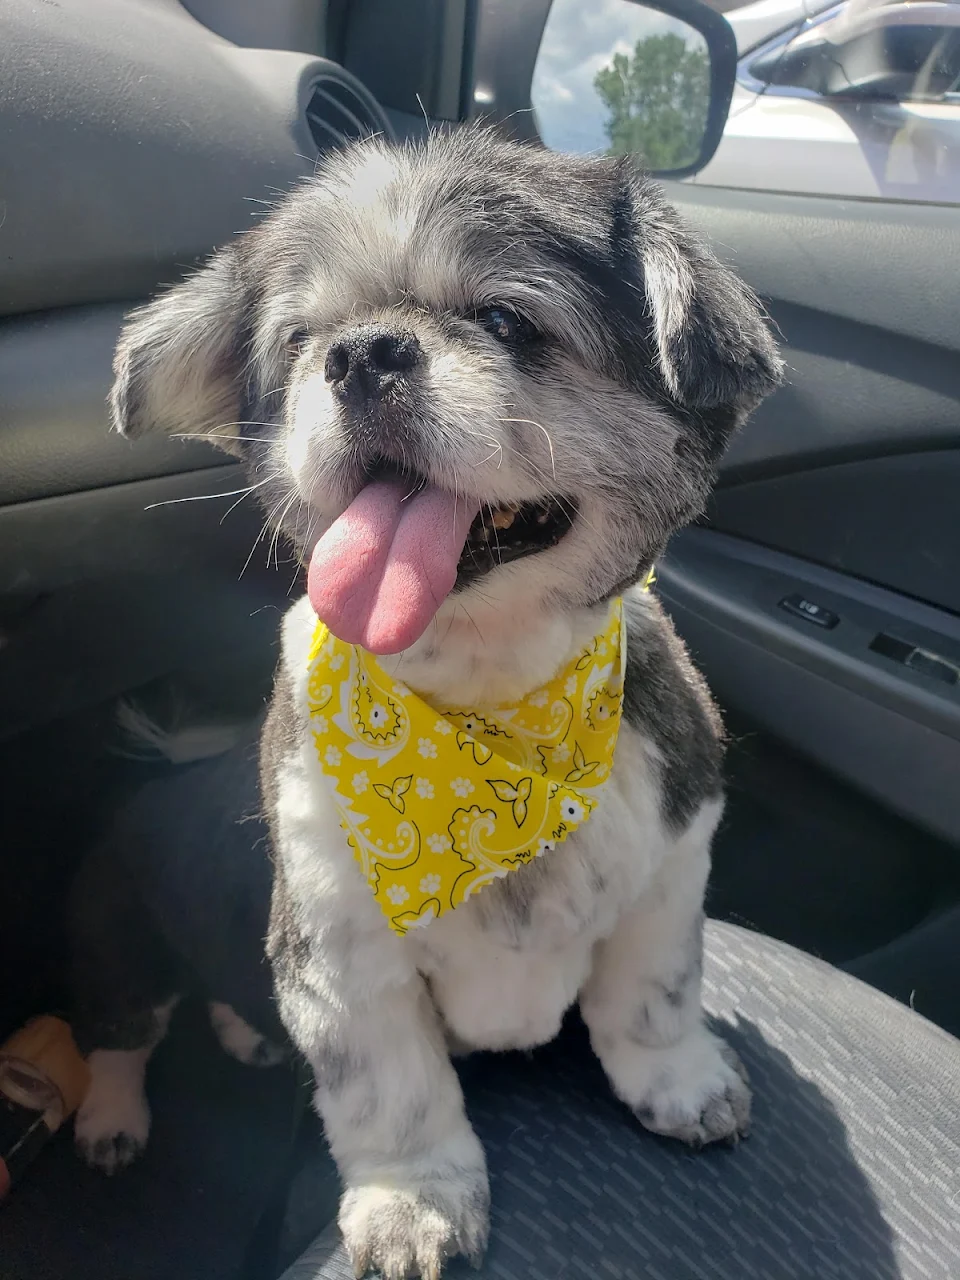 I just picked up this absolute stud from his grooming appointment and thought everyone should see how handsome he looks in yellow